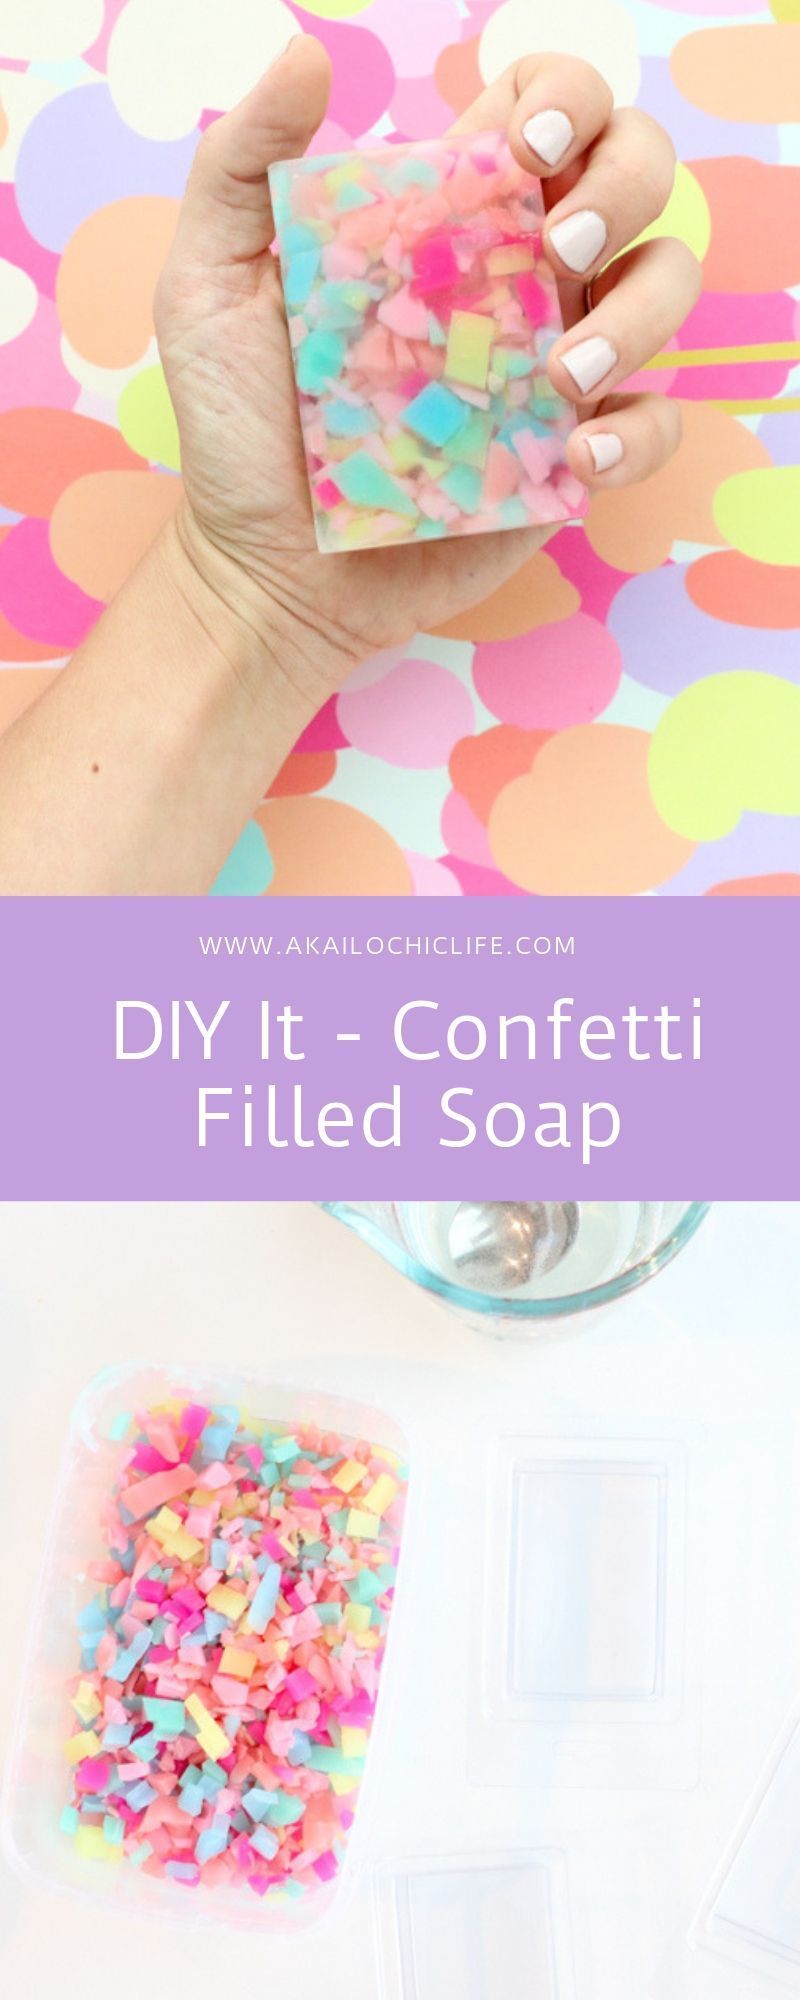 DIY It - Confetti Filled Soap - A Kailo Chic Life -   diy Tumblr gifts